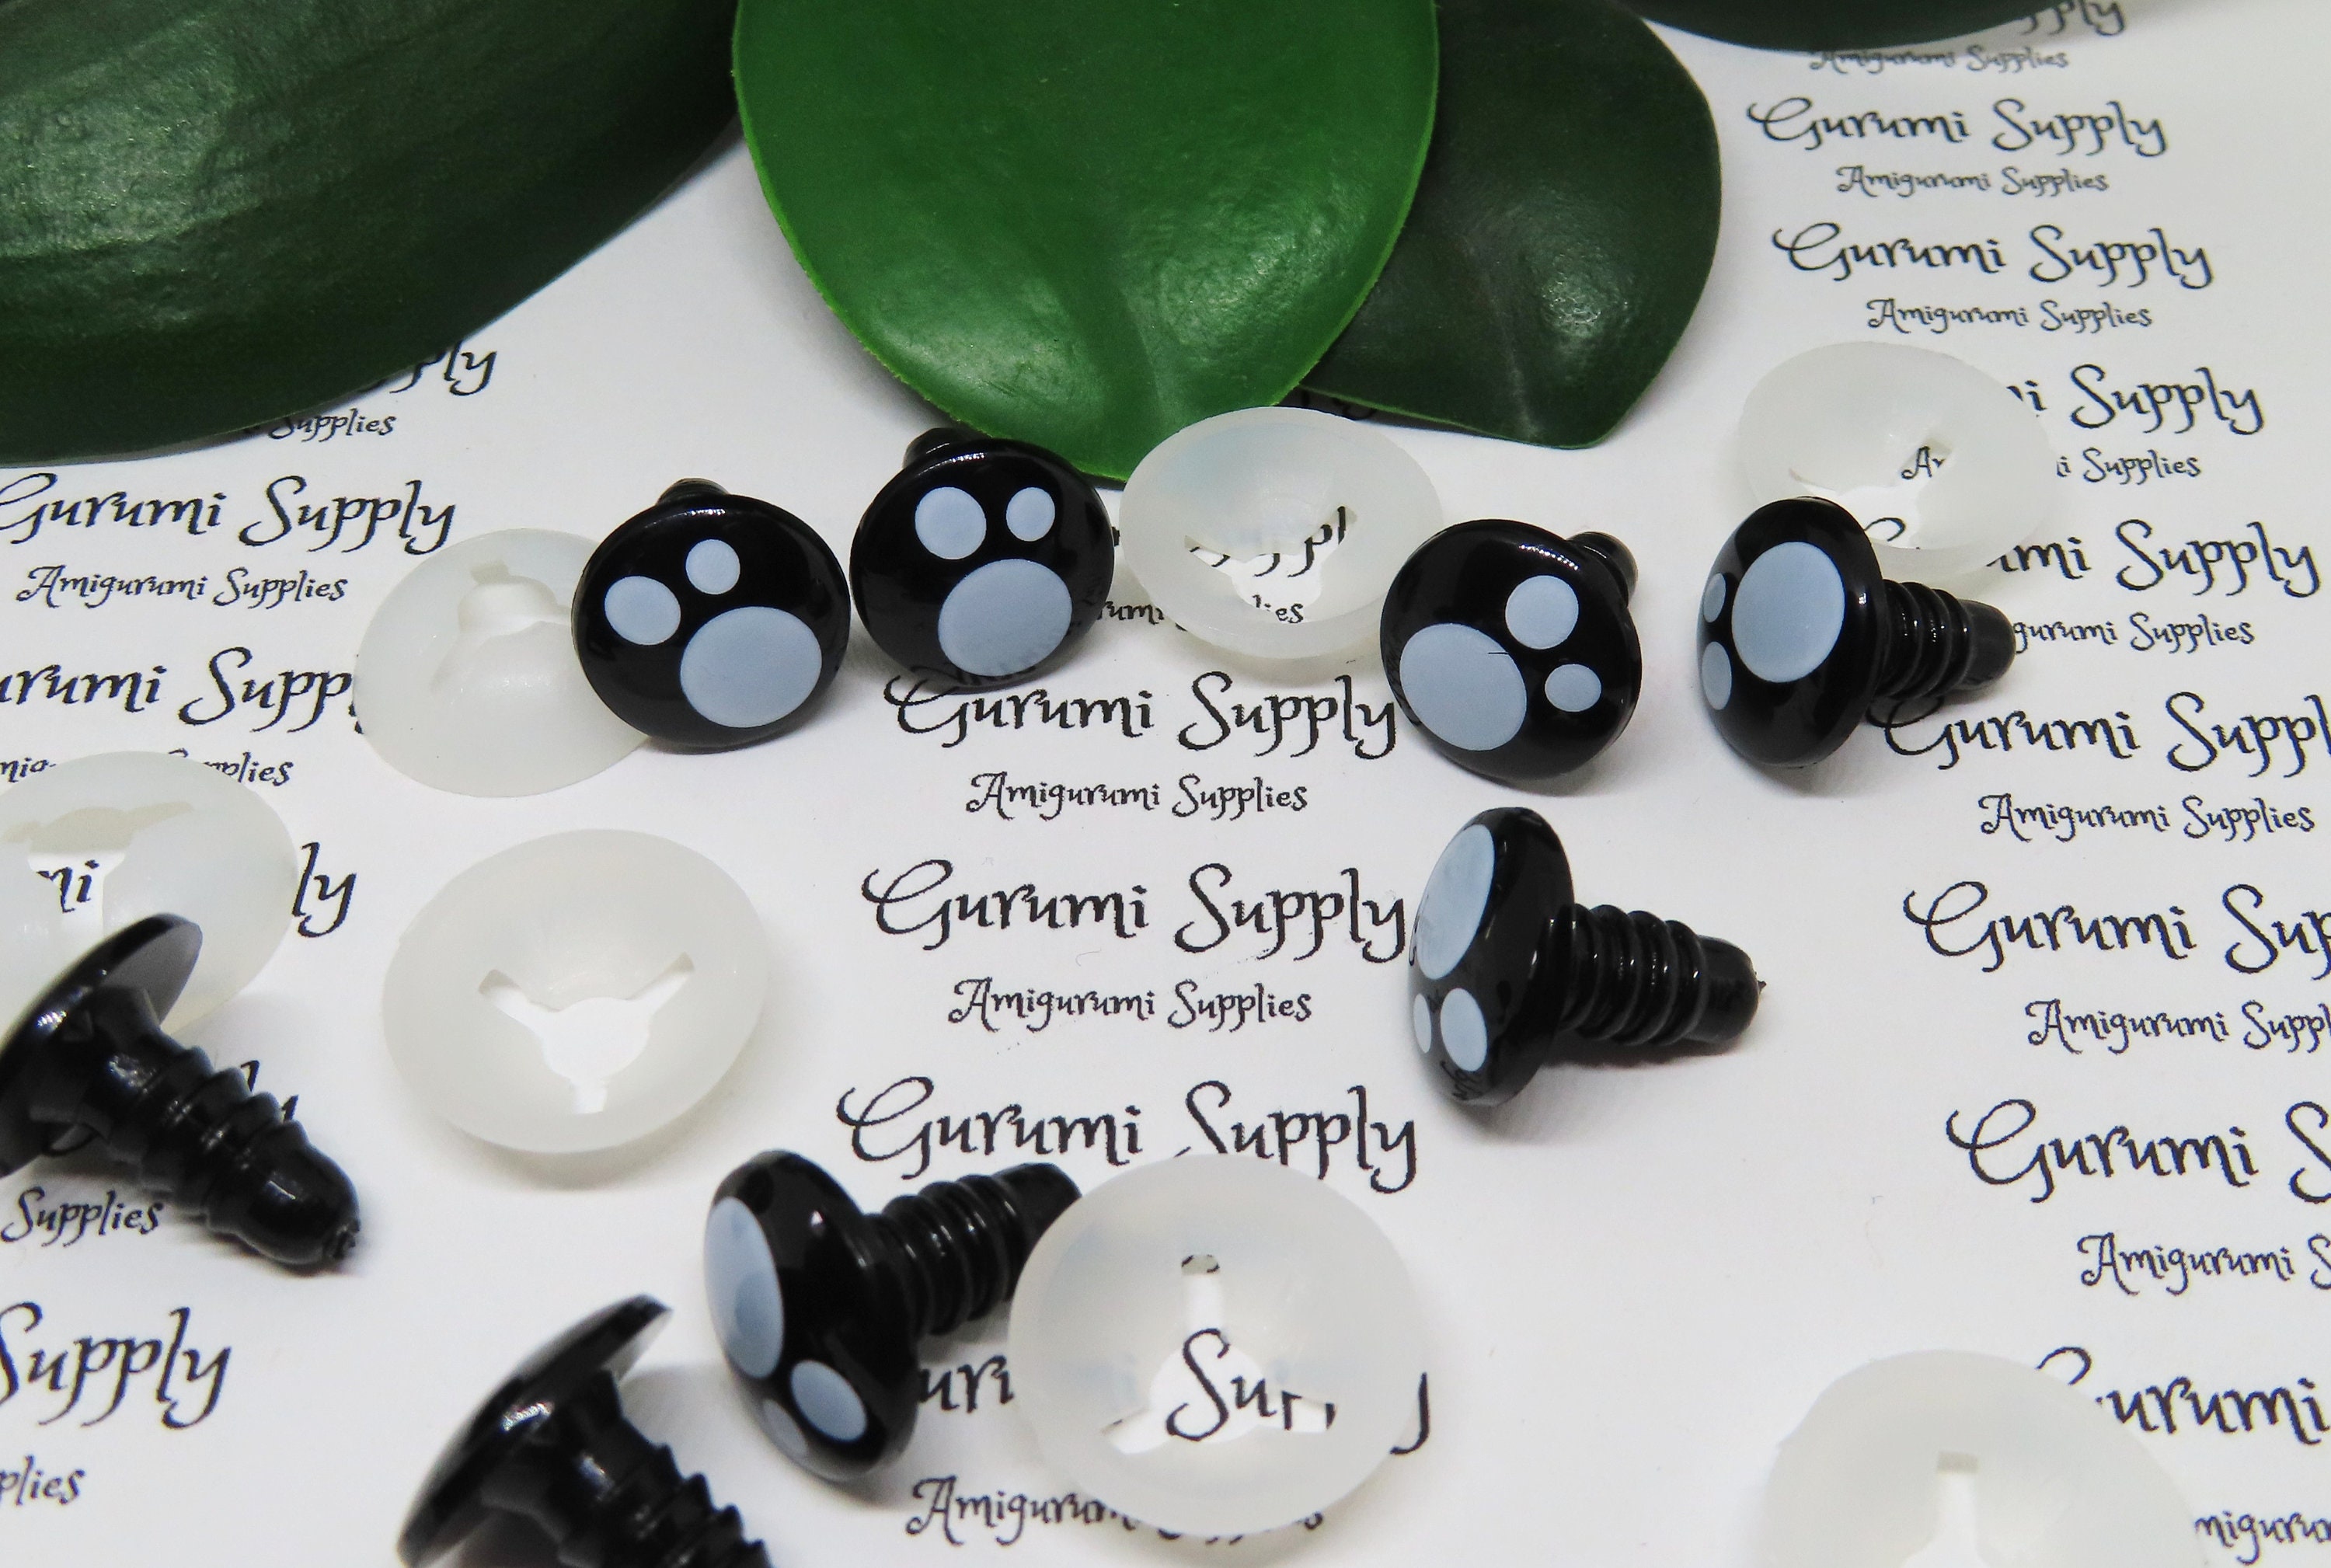 16mm x 20mm Toy Safety Eyes Dollmaking Oval Black and White Eyes